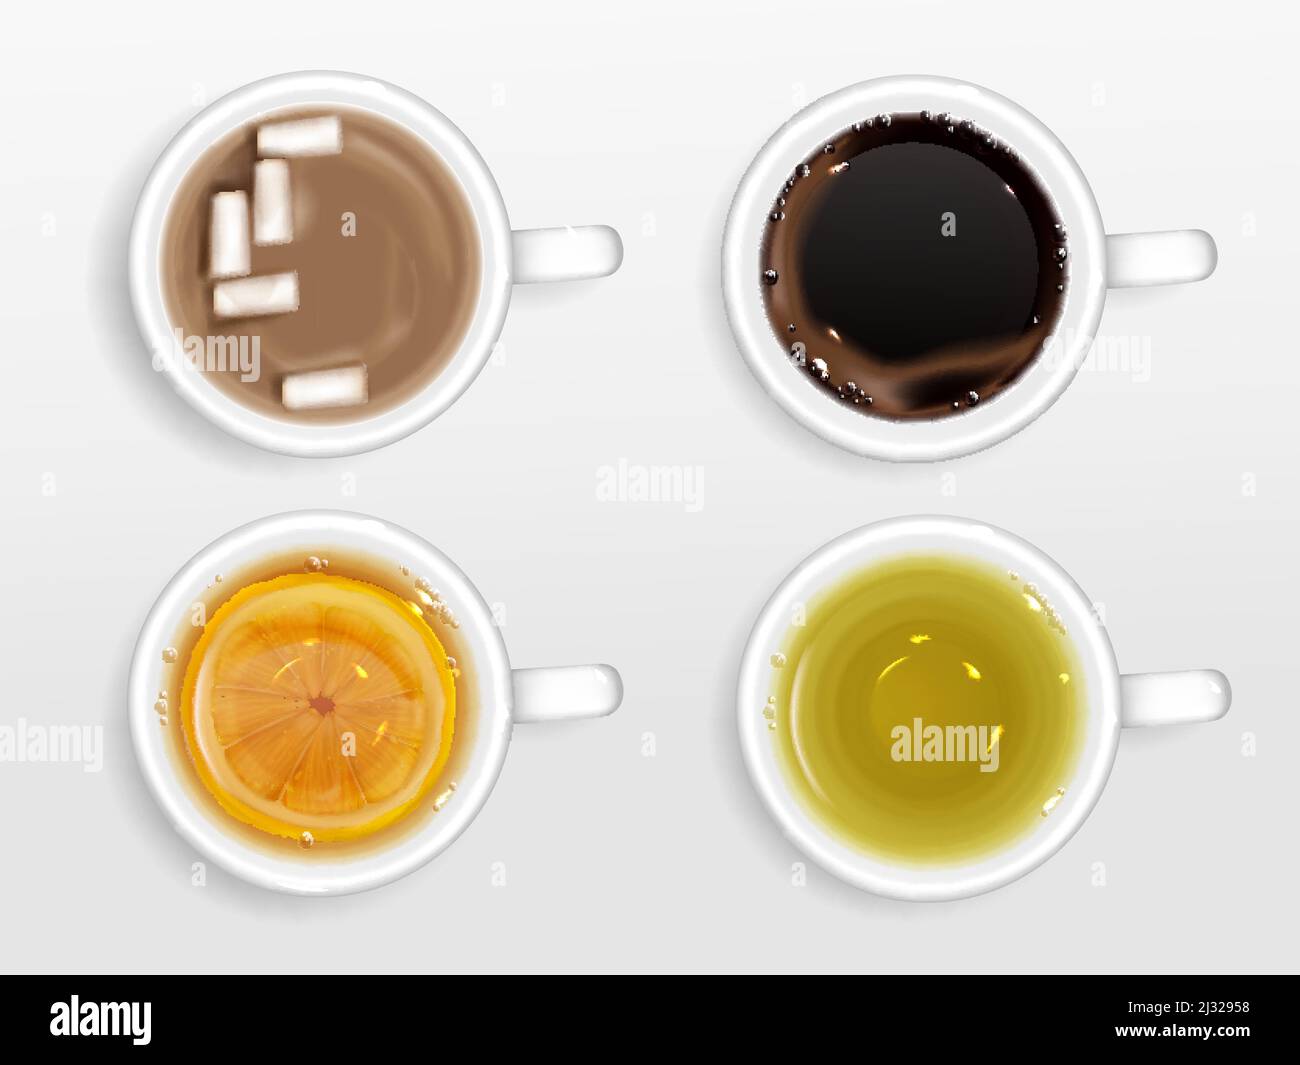 https://c8.alamy.com/comp/2J32958/cups-of-coffee-tea-and-cocoa-top-view-vector-realistic-set-of-hot-drinks-in-mugs-espresso-green-tea-and-black-with-lemon-chocolate-with-milk-and-2J32958.jpg